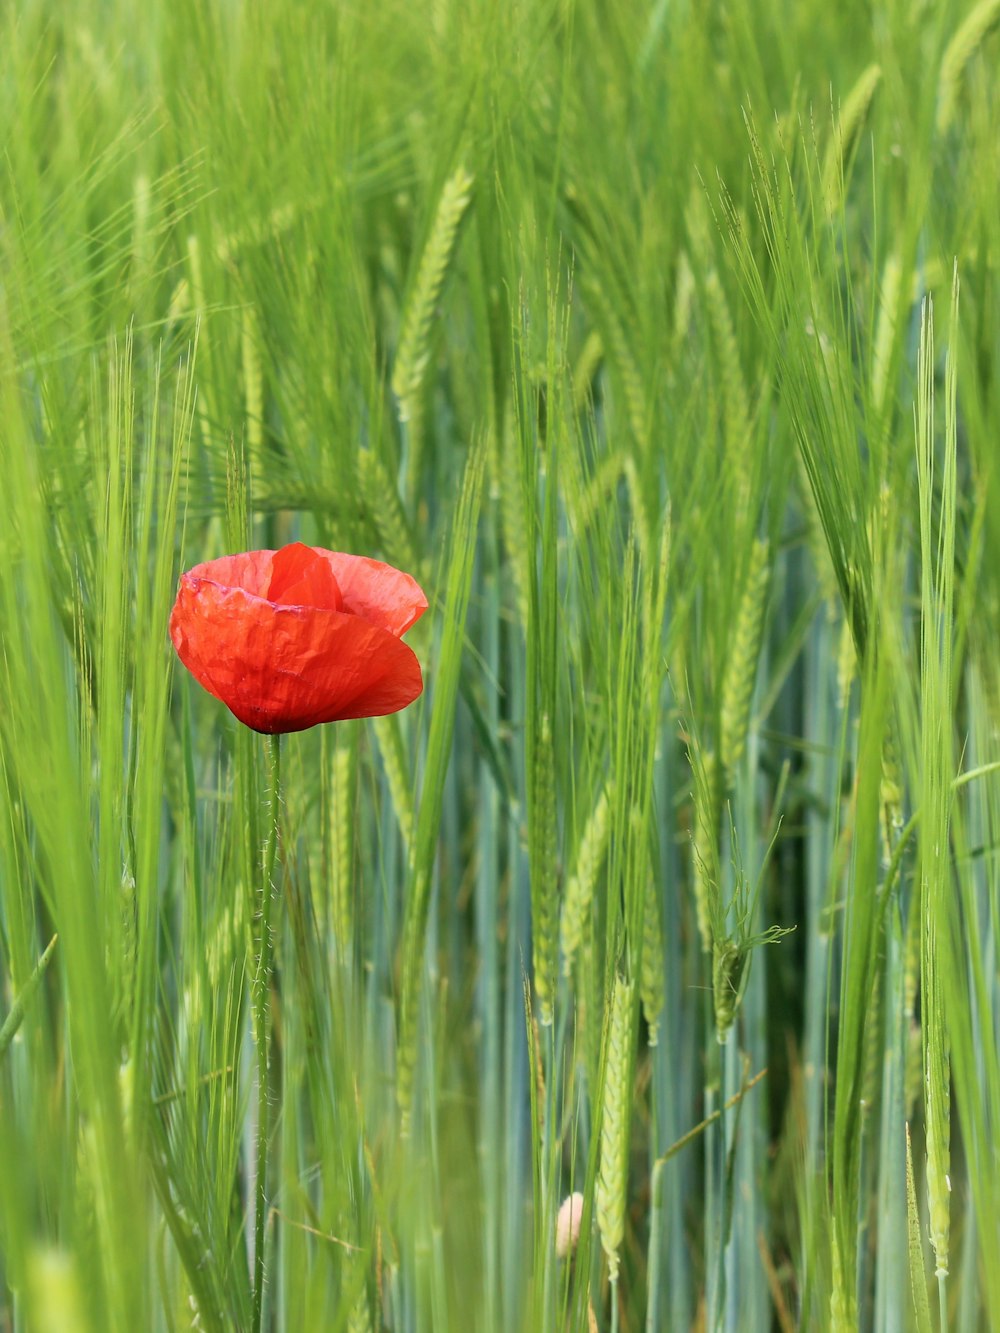 a red poppy in a green field of wheat